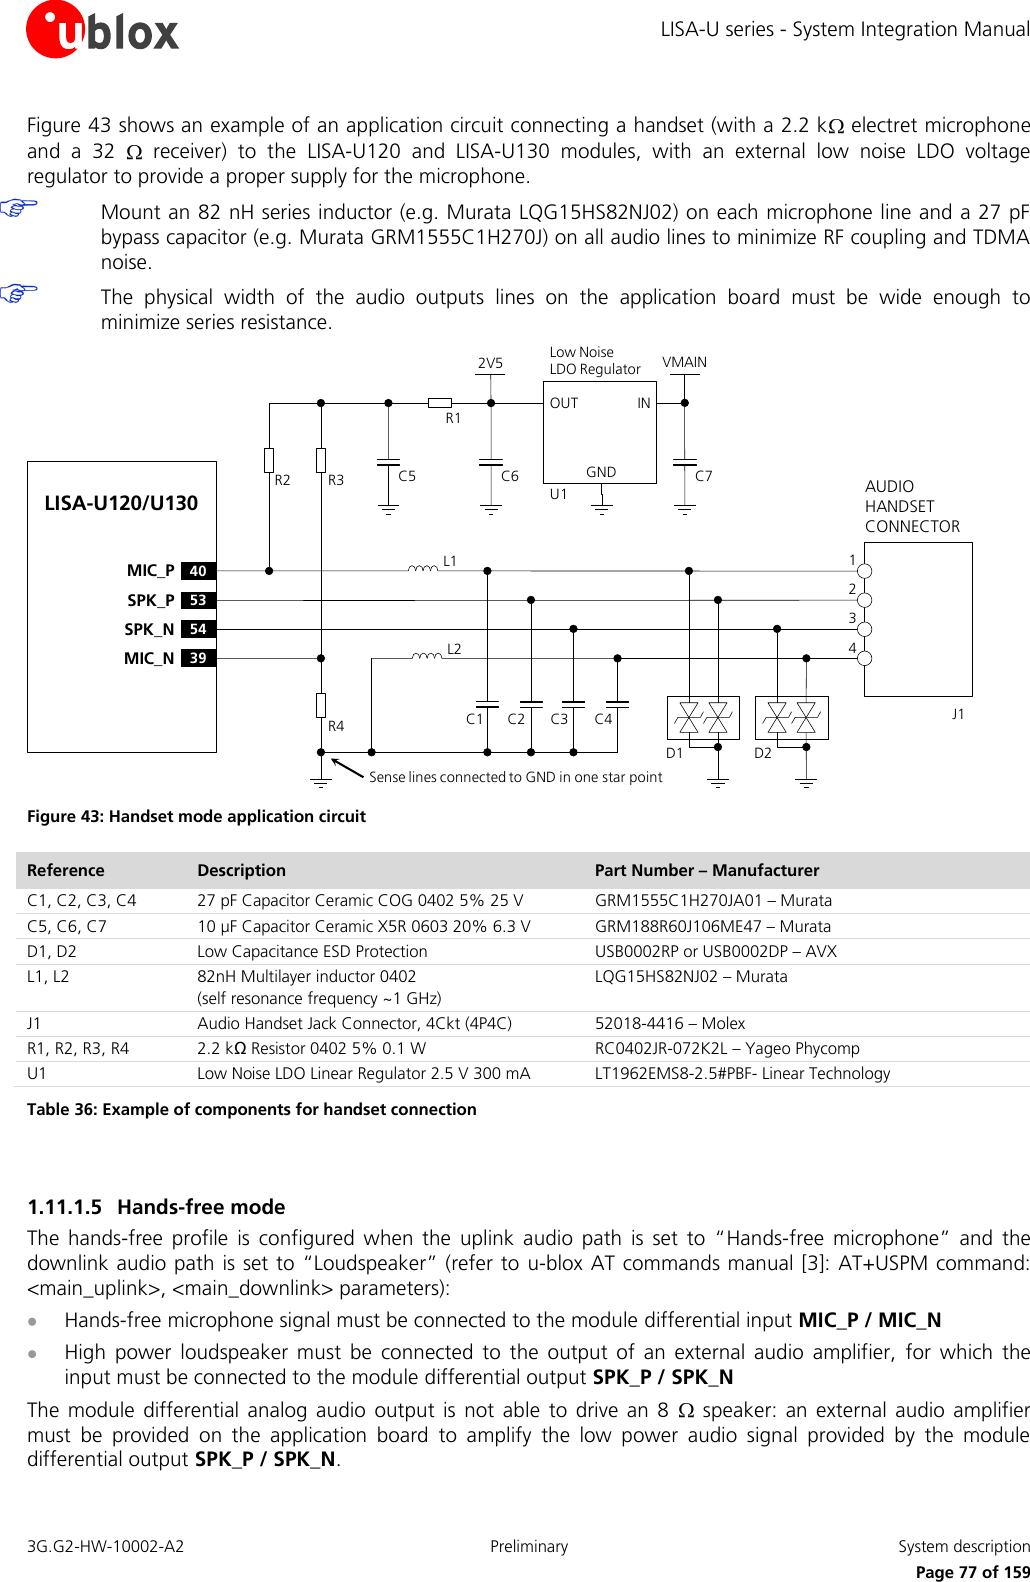 LISA-U series - System Integration Manual 3G.G2-HW-10002-A2  Preliminary  System description      Page 77 of 159 Figure 43 shows an example of an application circuit connecting a handset (with a 2.2 k  electret microphone and  a  32    receiver)  to  the  LISA-U120  and  LISA-U130  modules,  with  an  external  low  noise  LDO  voltage regulator to provide a proper supply for the microphone.  Mount an 82 nH series inductor (e.g. Murata LQG15HS82NJ02) on each microphone line and a 27 pF bypass capacitor (e.g. Murata GRM1555C1H270J) on all audio lines to minimize RF coupling and TDMA noise.  The  physical  width  of  the  audio  outputs  lines  on  the  application  board  must  be  wide  enough  to minimize series resistance. LISA-U120/U130C1 C2 C3 J14321L153SPK_P54SPK_N40MIC_P39MIC_ND1AUDIO HANDSET CONNECTORD2INOUTGNDLow Noise LDO RegulatorU1R4R1C6R3R2 C52V5Sense lines connected to GND in one star pointC4L2VMAINC7 Figure 43: Handset mode application circuit Reference Description Part Number – Manufacturer C1, C2, C3, C4 27 pF Capacitor Ceramic COG 0402 5% 25 V  GRM1555C1H270JA01 – Murata C5, C6, C7 10 µF Capacitor Ceramic X5R 0603 20% 6.3 V GRM188R60J106ME47 – Murata D1, D2 Low Capacitance ESD Protection USB0002RP or USB0002DP – AVX L1, L2 82nH Multilayer inductor 0402 (self resonance frequency ~1 GHz) LQG15HS82NJ02 – Murata J1 Audio Handset Jack Connector, 4Ckt (4P4C) 52018-4416 – Molex  R1, R2, R3, R4 2.2 kΩ Resistor 0402 5% 0.1 W  RC0402JR-072K2L – Yageo Phycomp U1 Low Noise LDO Linear Regulator 2.5 V 300 mA LT1962EMS8-2.5#PBF- Linear Technology Table 36: Example of components for handset connection  1.11.1.5 Hands-free mode The  hands-free  profile  is  configured  when  the  uplink  audio  path  is  set  to  “Hands-free  microphone”  and  the downlink audio path is set to “Loudspeaker” (refer to  u-blox AT commands manual [3]: AT+USPM command: &lt;main_uplink&gt;, &lt;main_downlink&gt; parameters):  Hands-free microphone signal must be connected to the module differential input MIC_P / MIC_N  High  power  loudspeaker  must  be  connected  to  the  output  of  an  external  audio  amplifier,  for  which  the input must be connected to the module differential output SPK_P / SPK_N The  module differential  analog audio  output  is  not able  to drive  an  8    speaker:  an  external  audio amplifier must  be  provided  on  the  application  board  to  amplify  the  low  power  audio  signal  provided  by  the  module differential output SPK_P / SPK_N. 